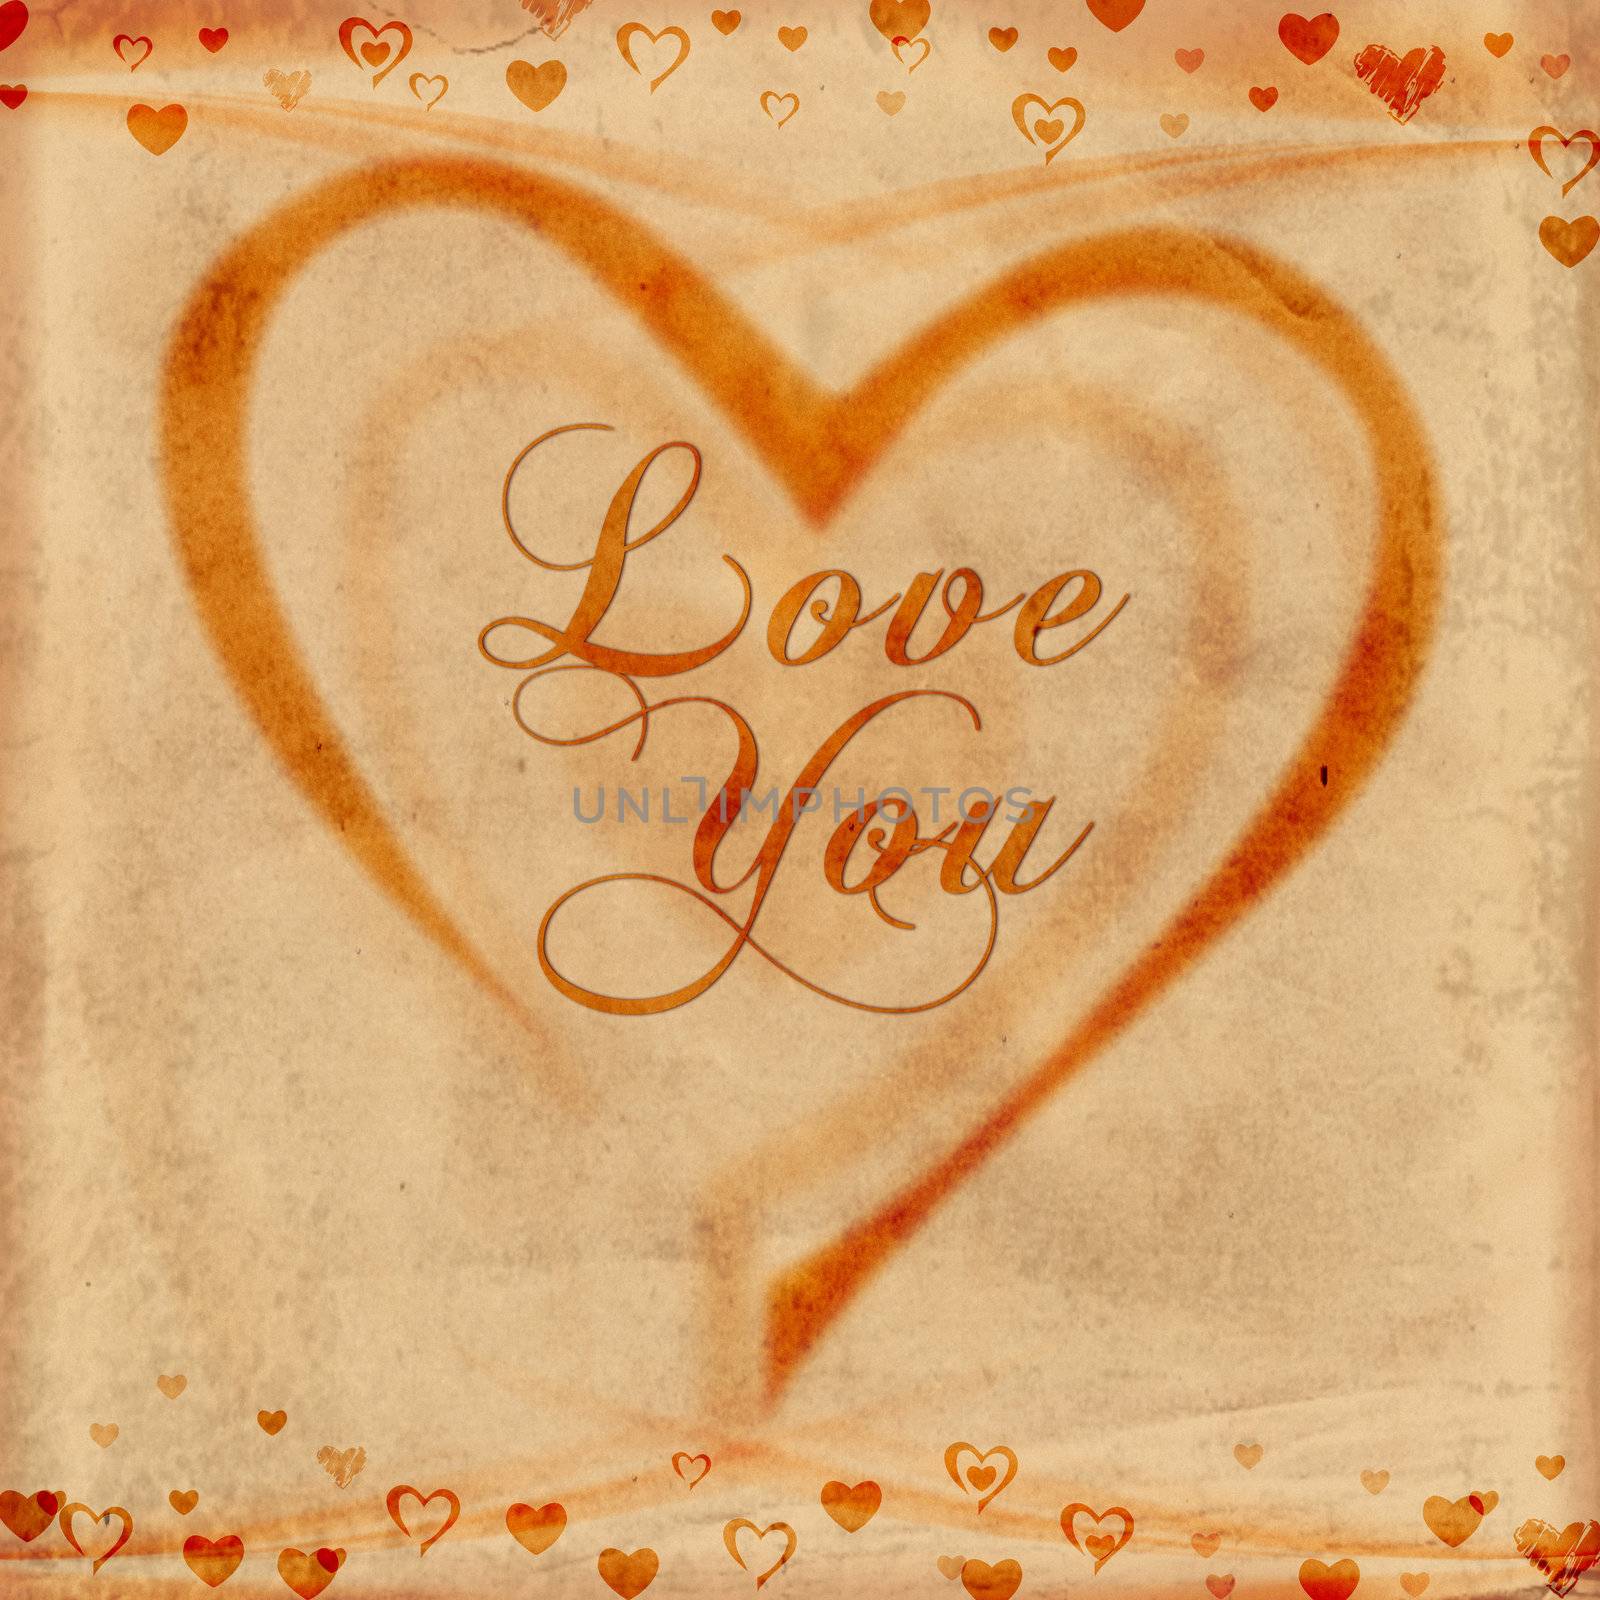 text love you with hearts on old paper